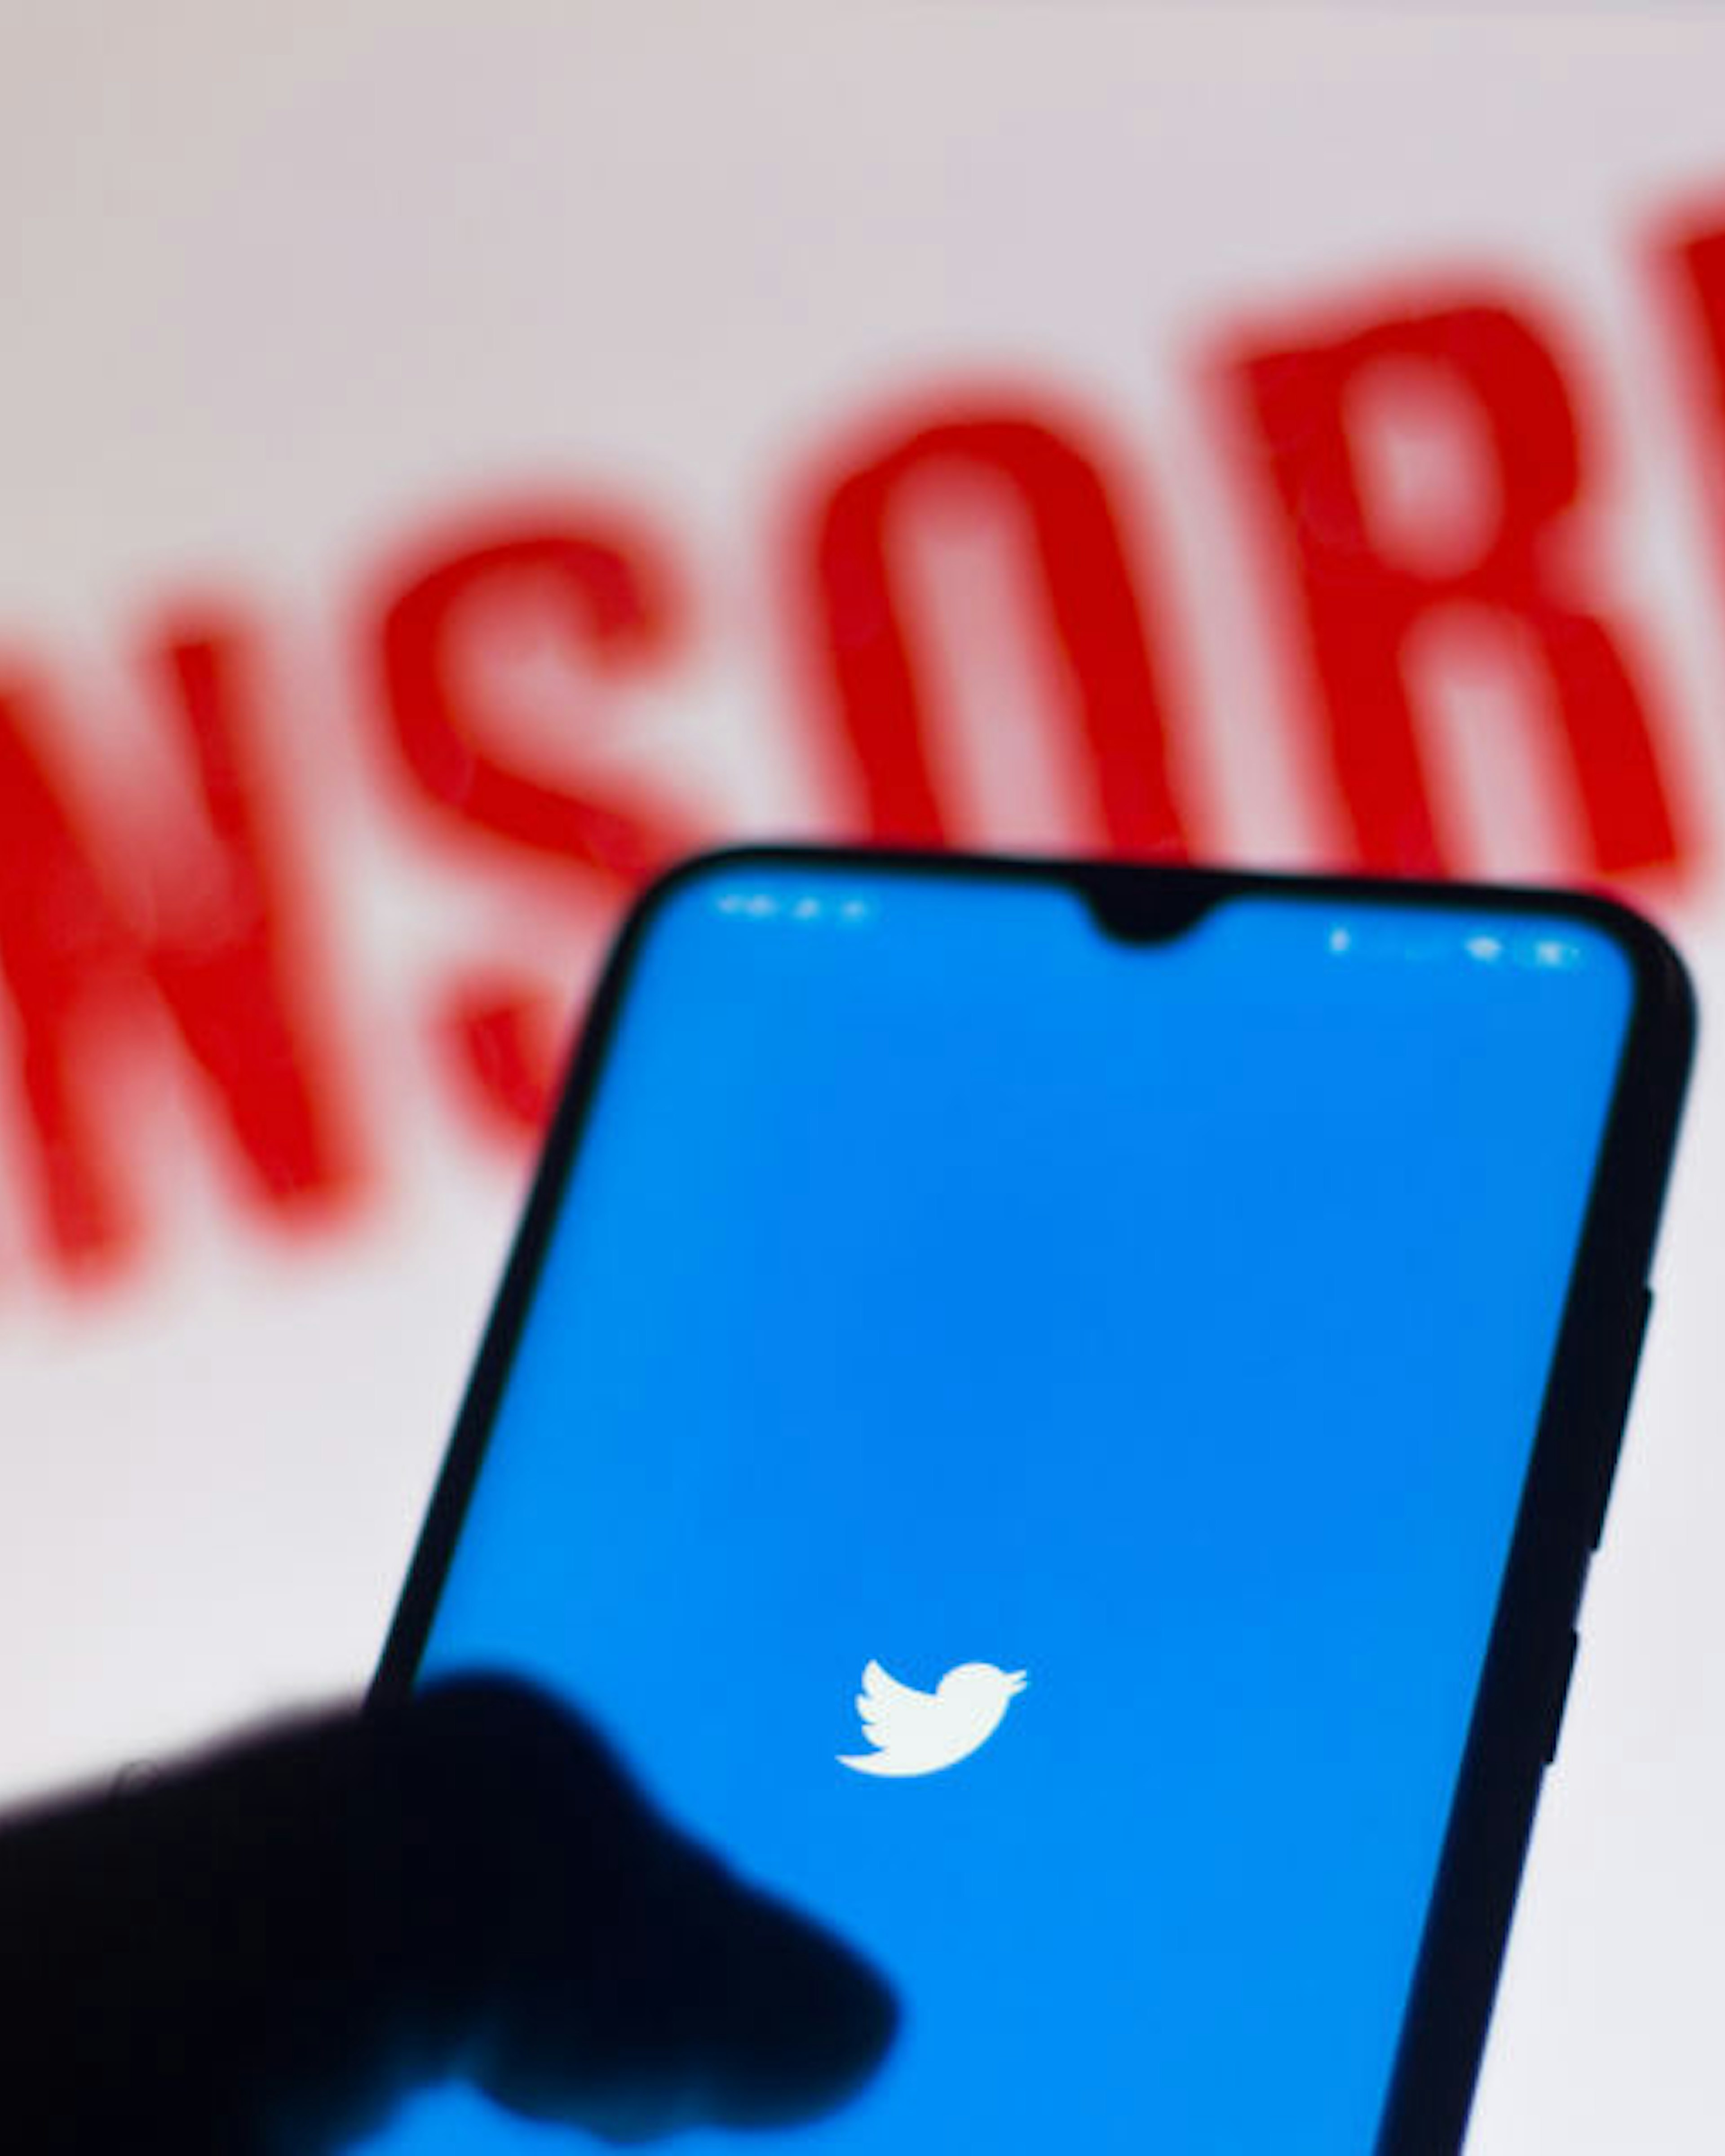 In this photo illustration the Twitter logo is displayed on a smartphone and a red alerting word "CENSORED" on the blurred background. (Photo Illustration by Rafael Henrique/SOPA Images/LightRocket via Getty Images)